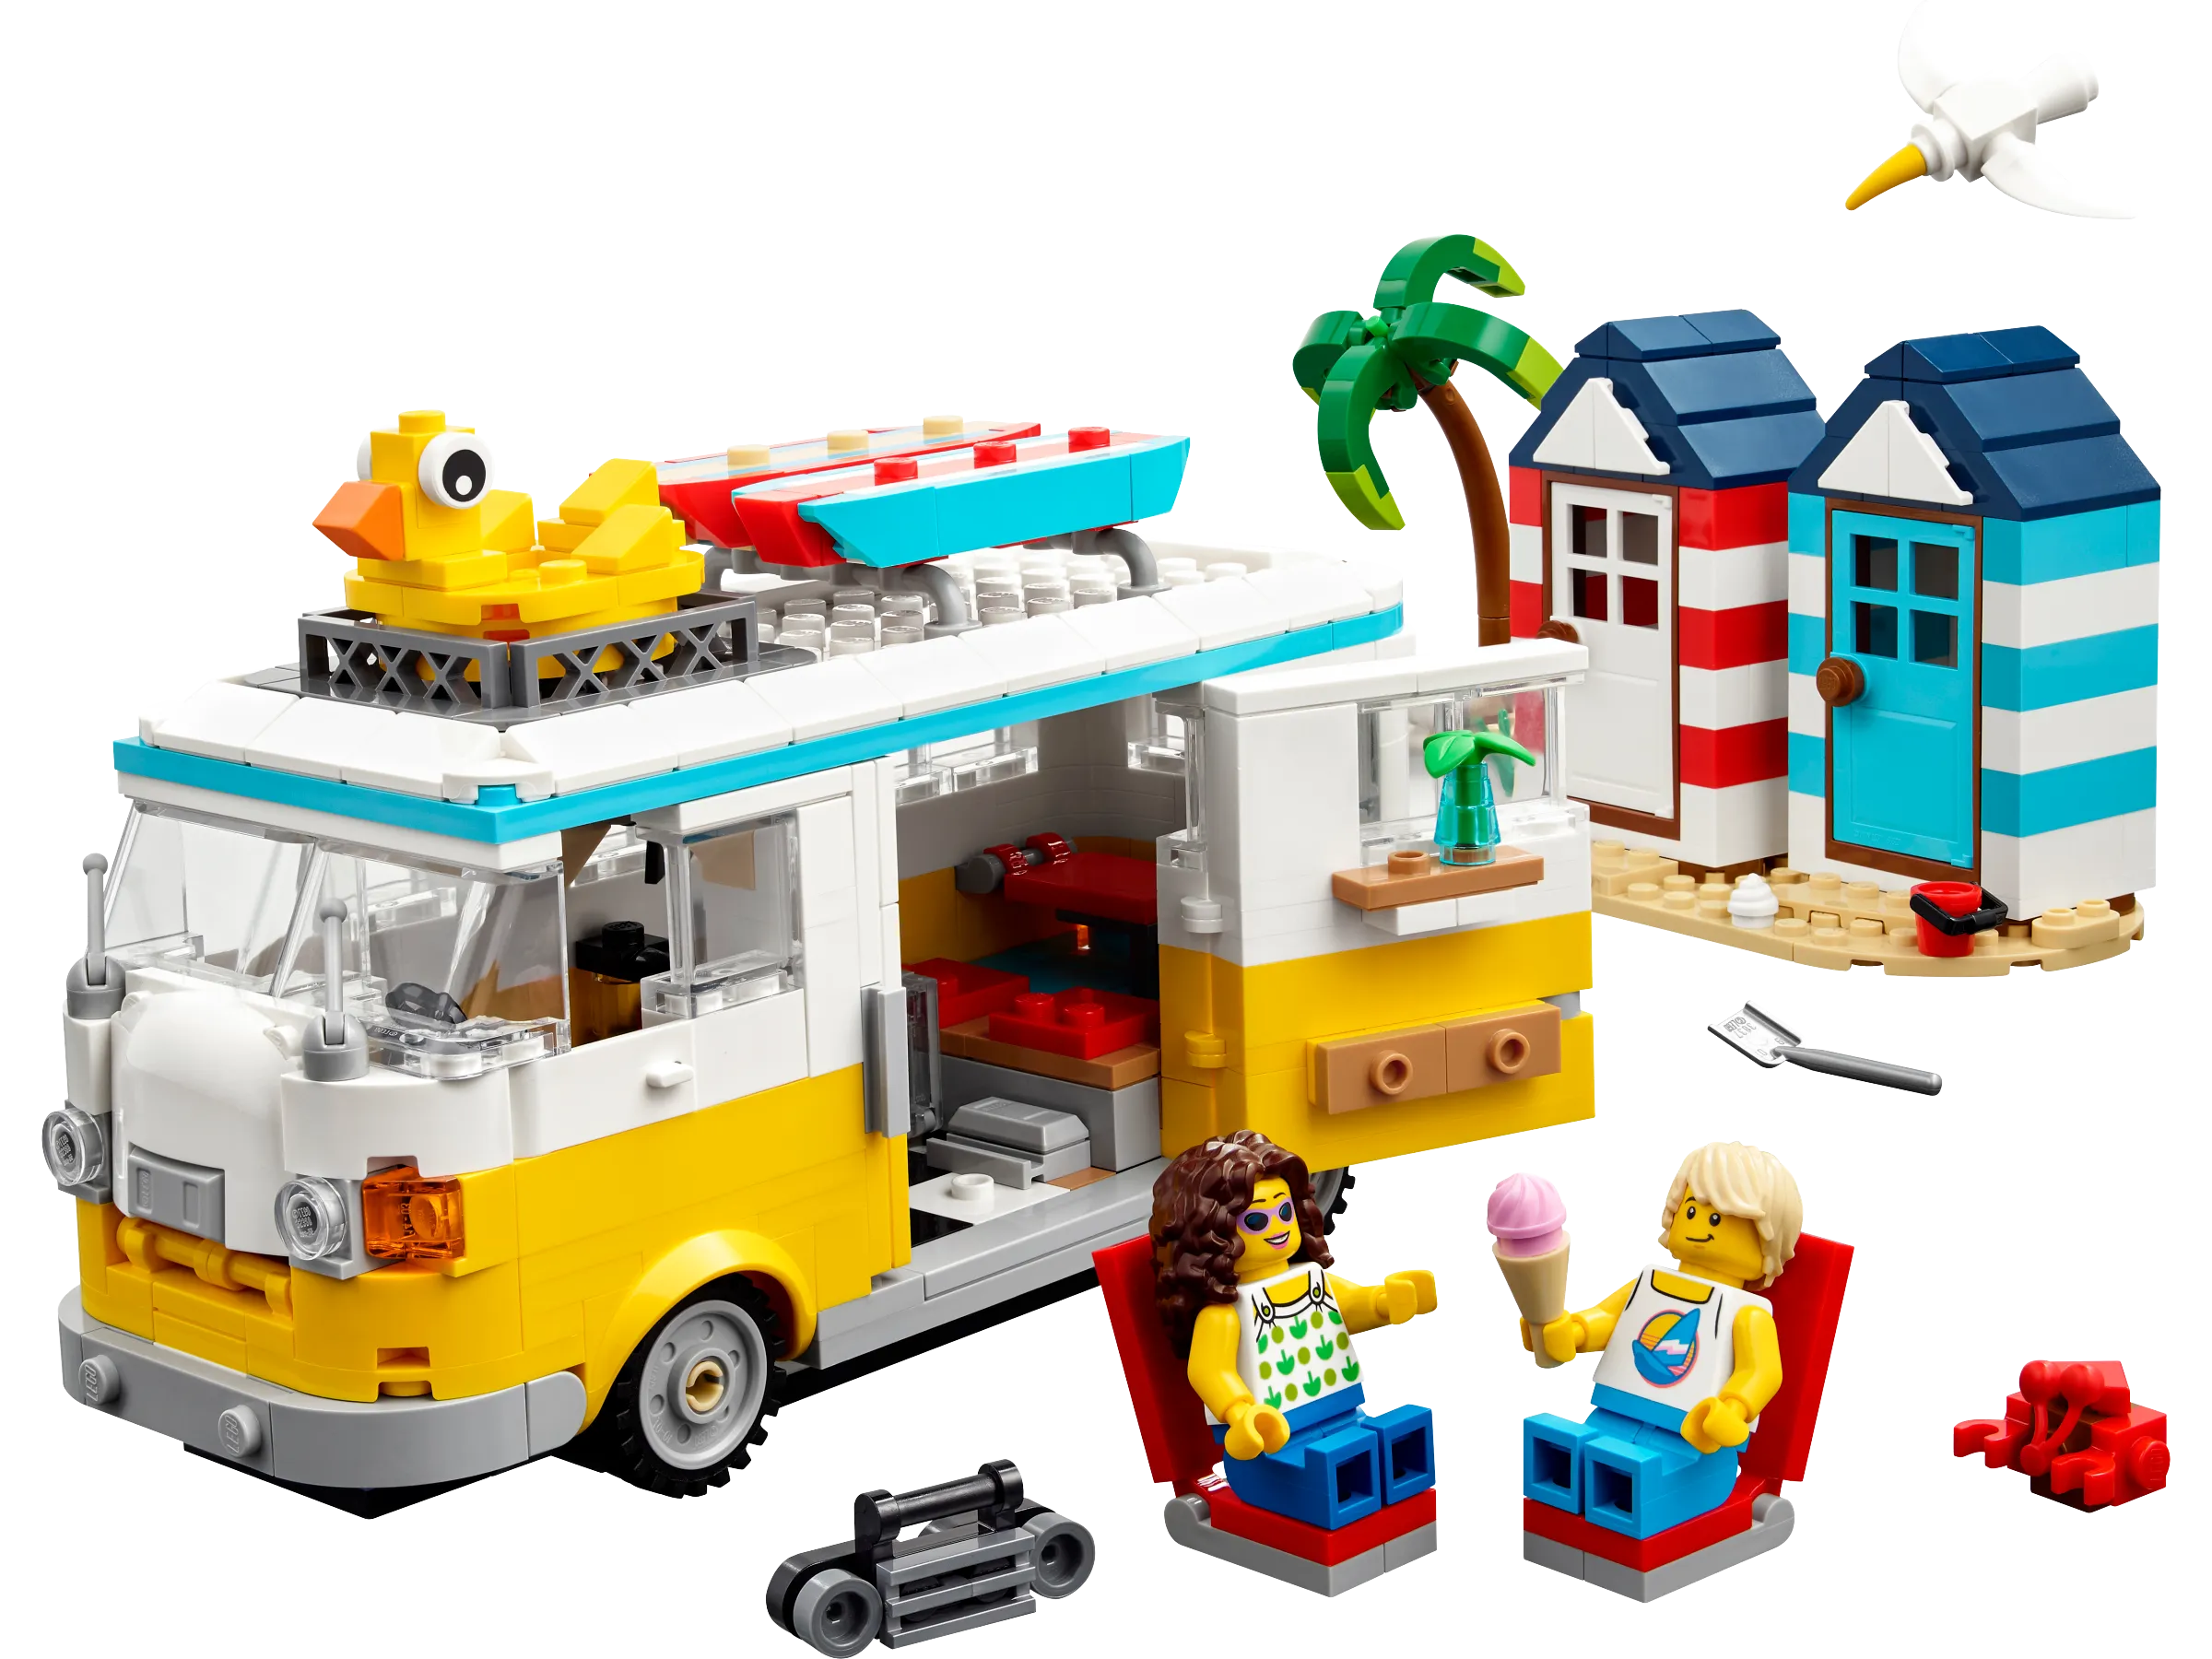 Is Funwhole's Camper Van Better than a LEGO Building Kit?